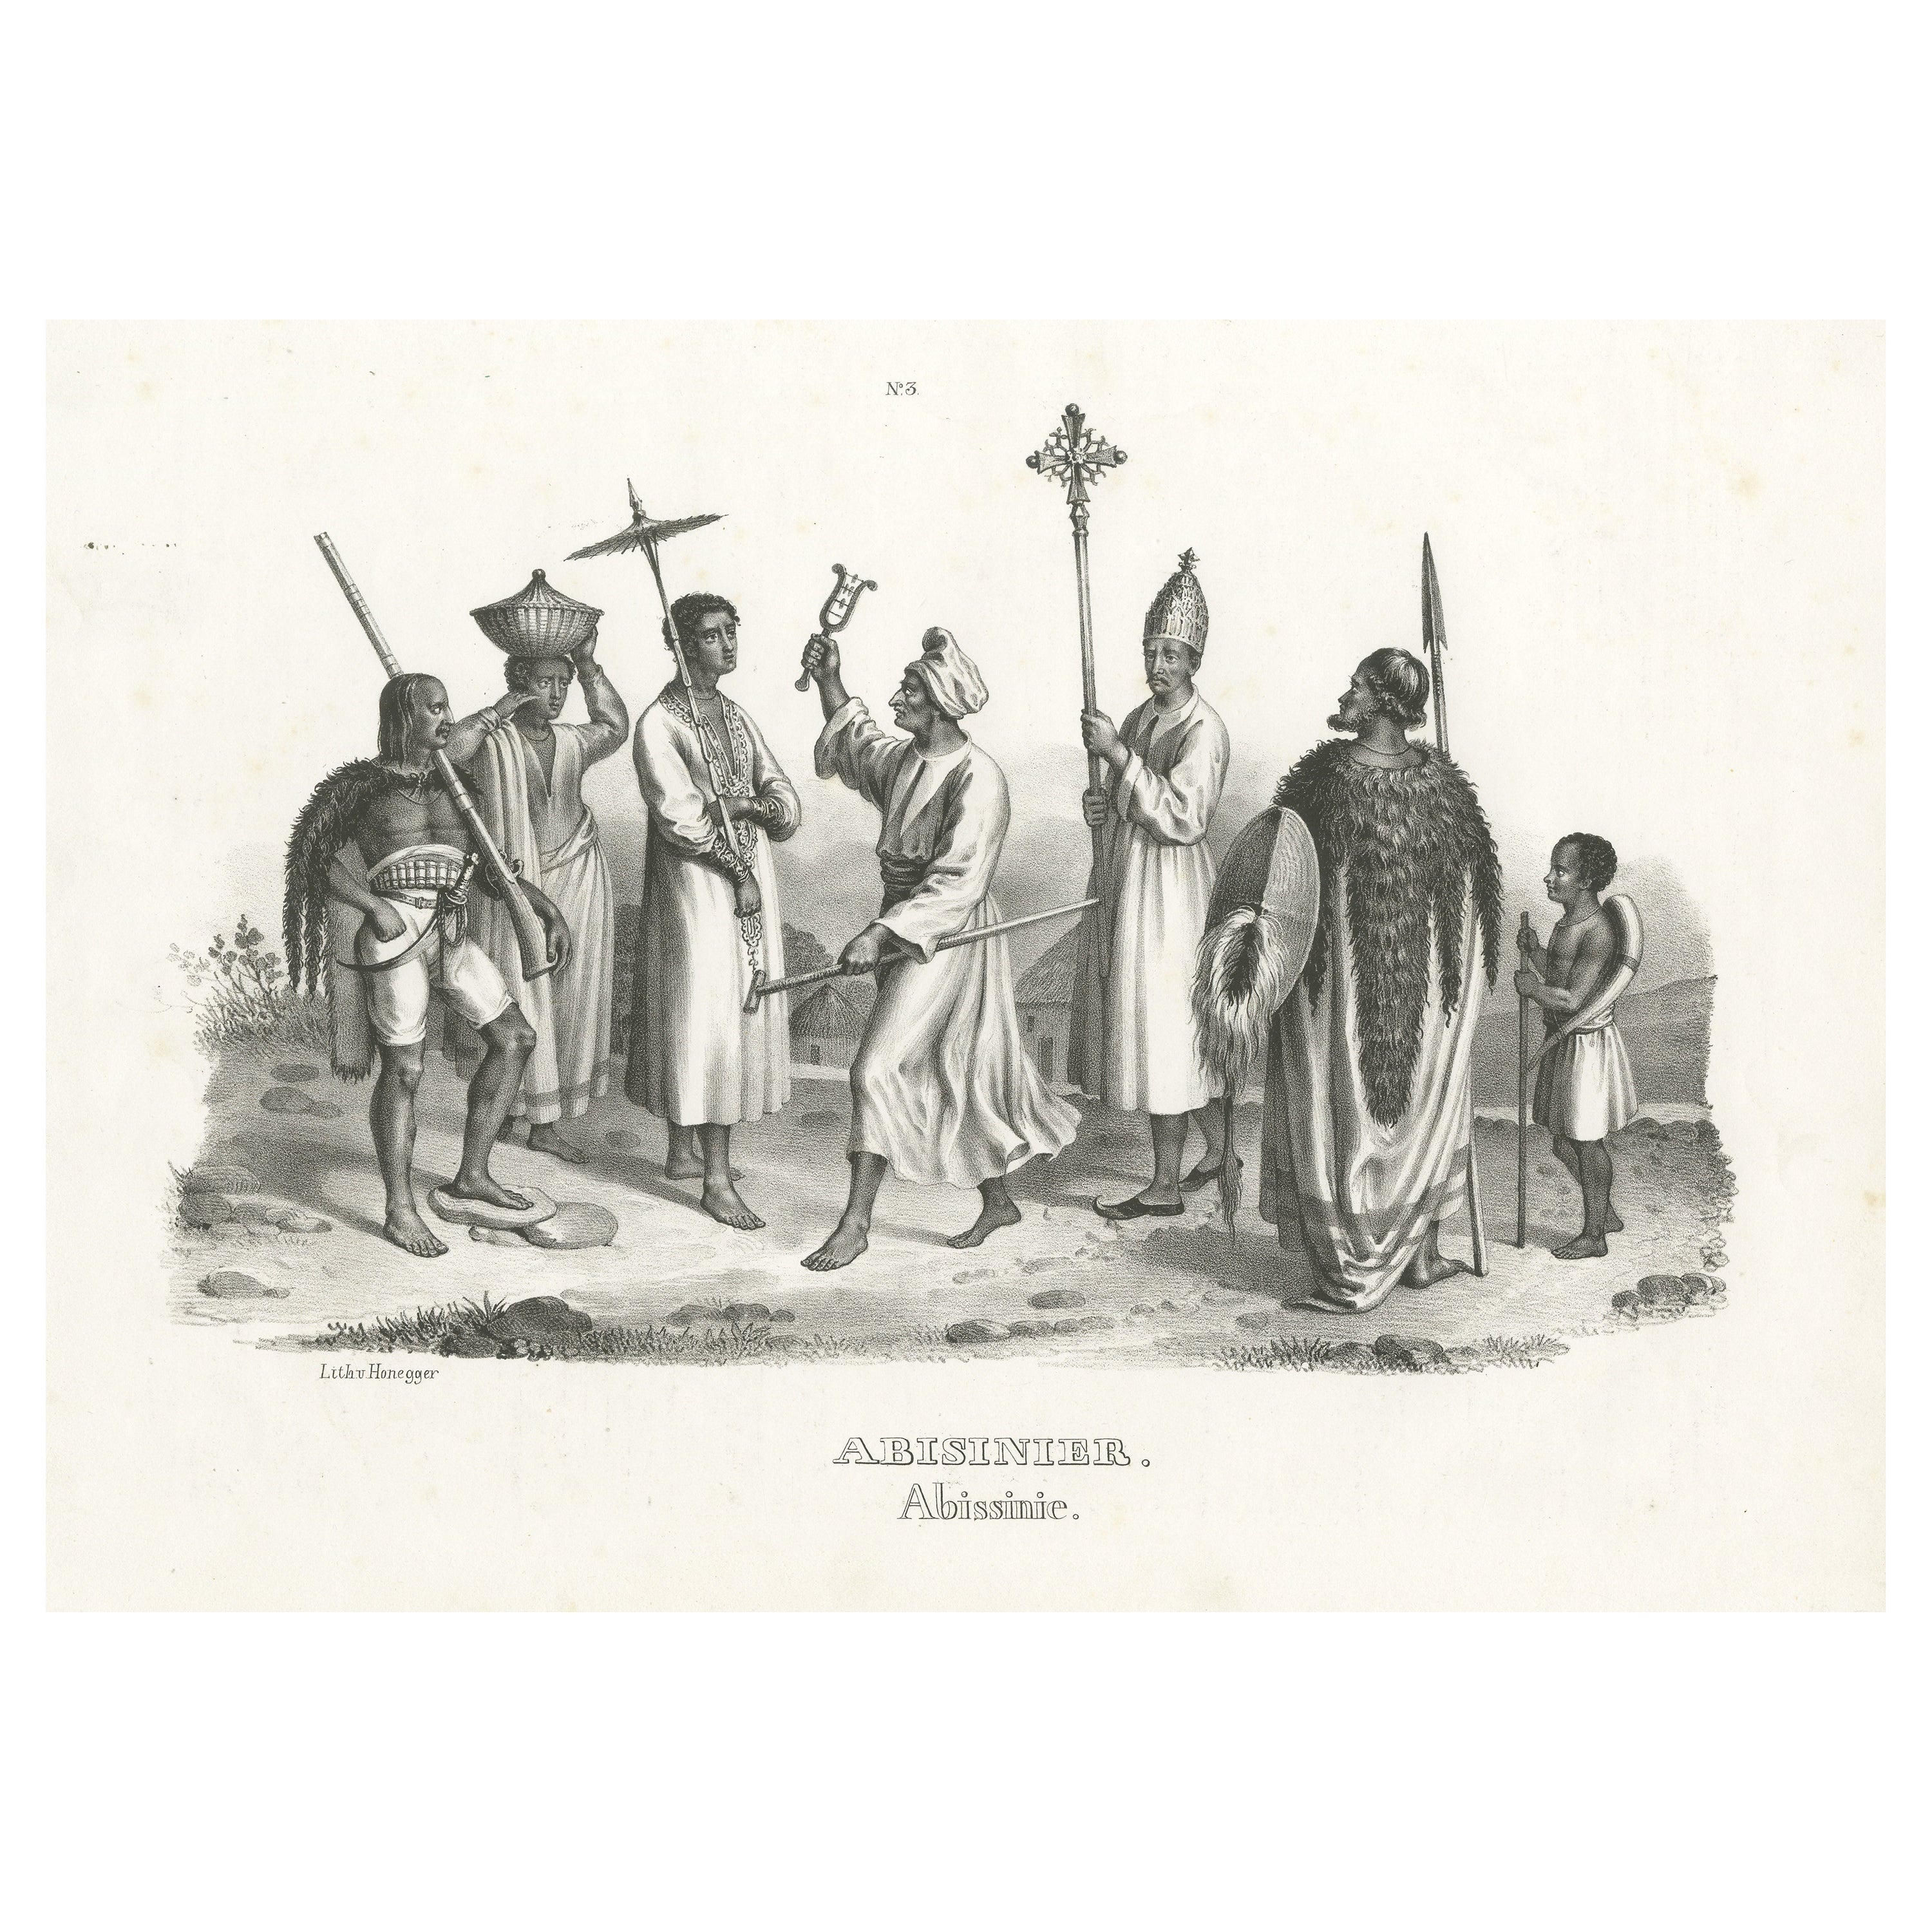 Antique Steel Engraved Print Showing Natives of Abyssinia, Ethiopia For Sale